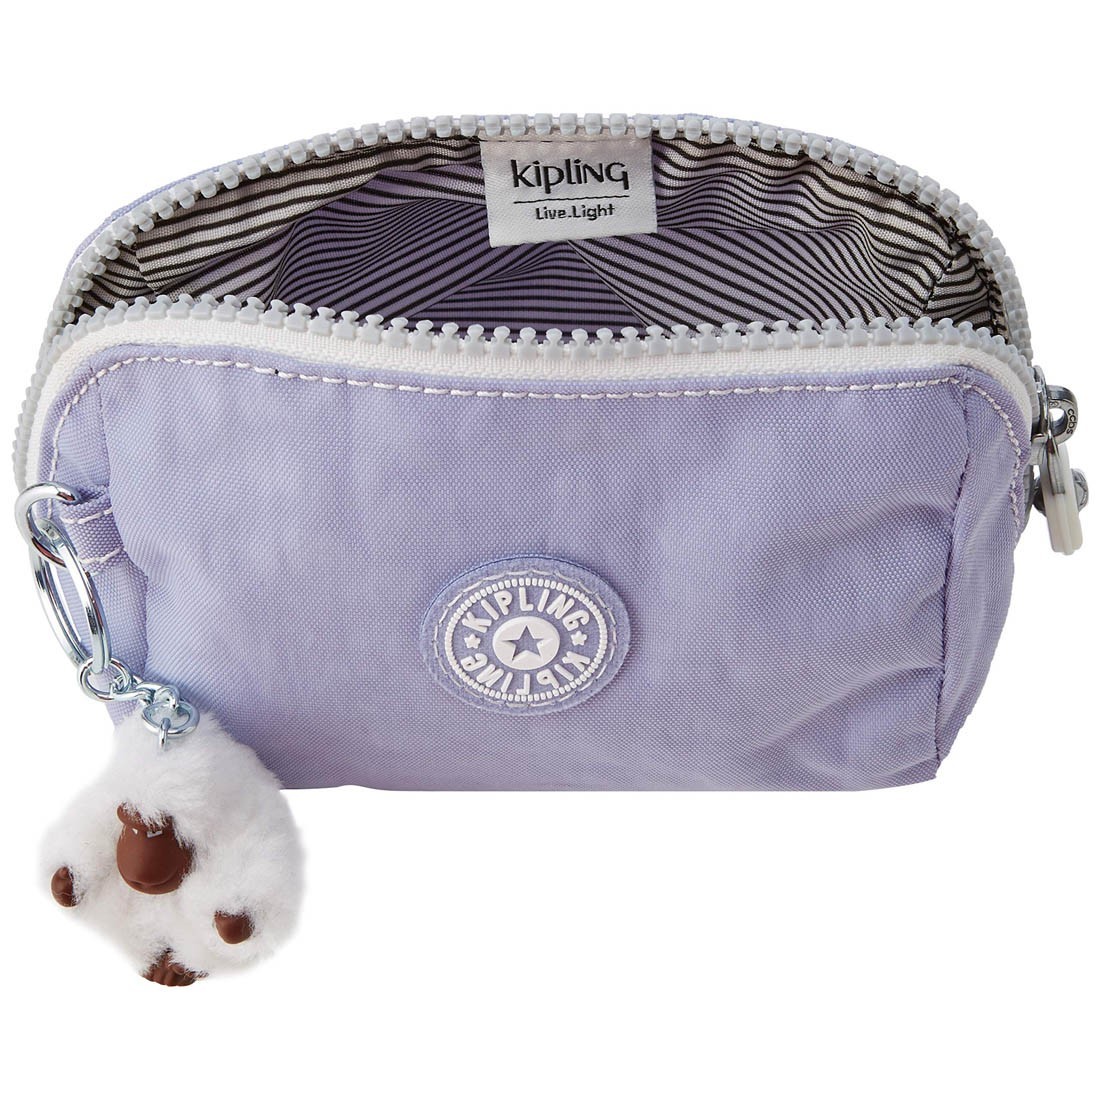 Buy Kipling Pouch Inami S - Active Lilae Bl - Kipling, delivered to your  home | The Outfit